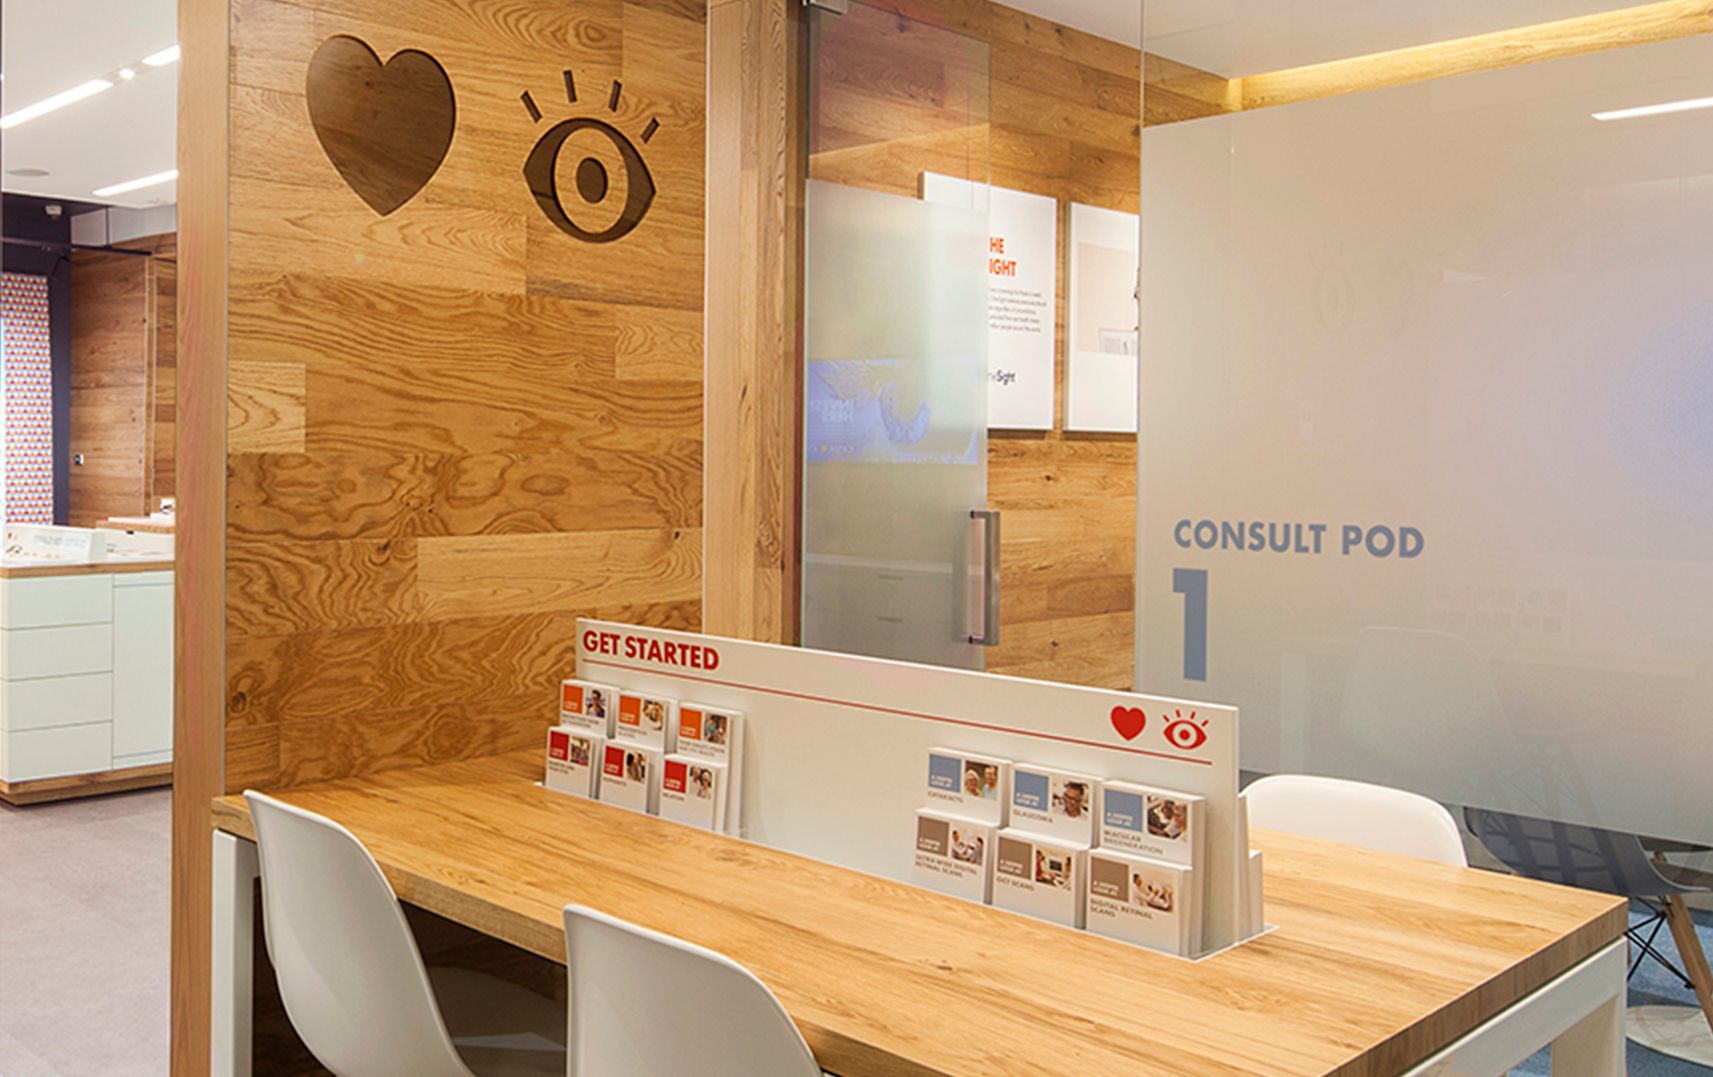 Wooden wall with a heart and an illustrated eye carved into it, next to a wooden desk with four white chairs and a table divider that reads “Get Started”